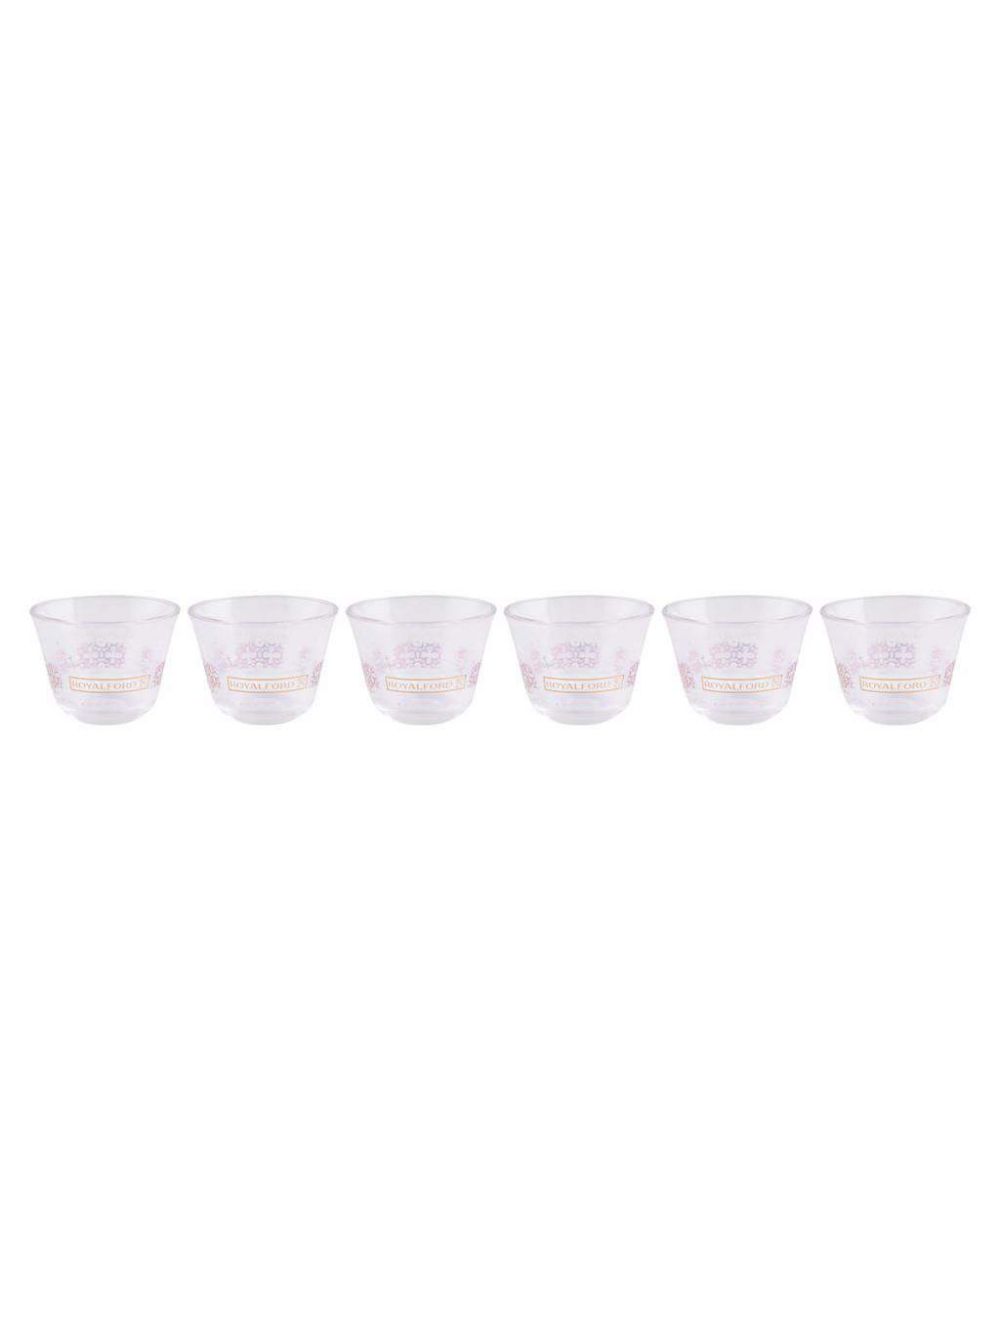 Royalford RF8723 Thick Wall Glass Coffee Cups 6Pcs